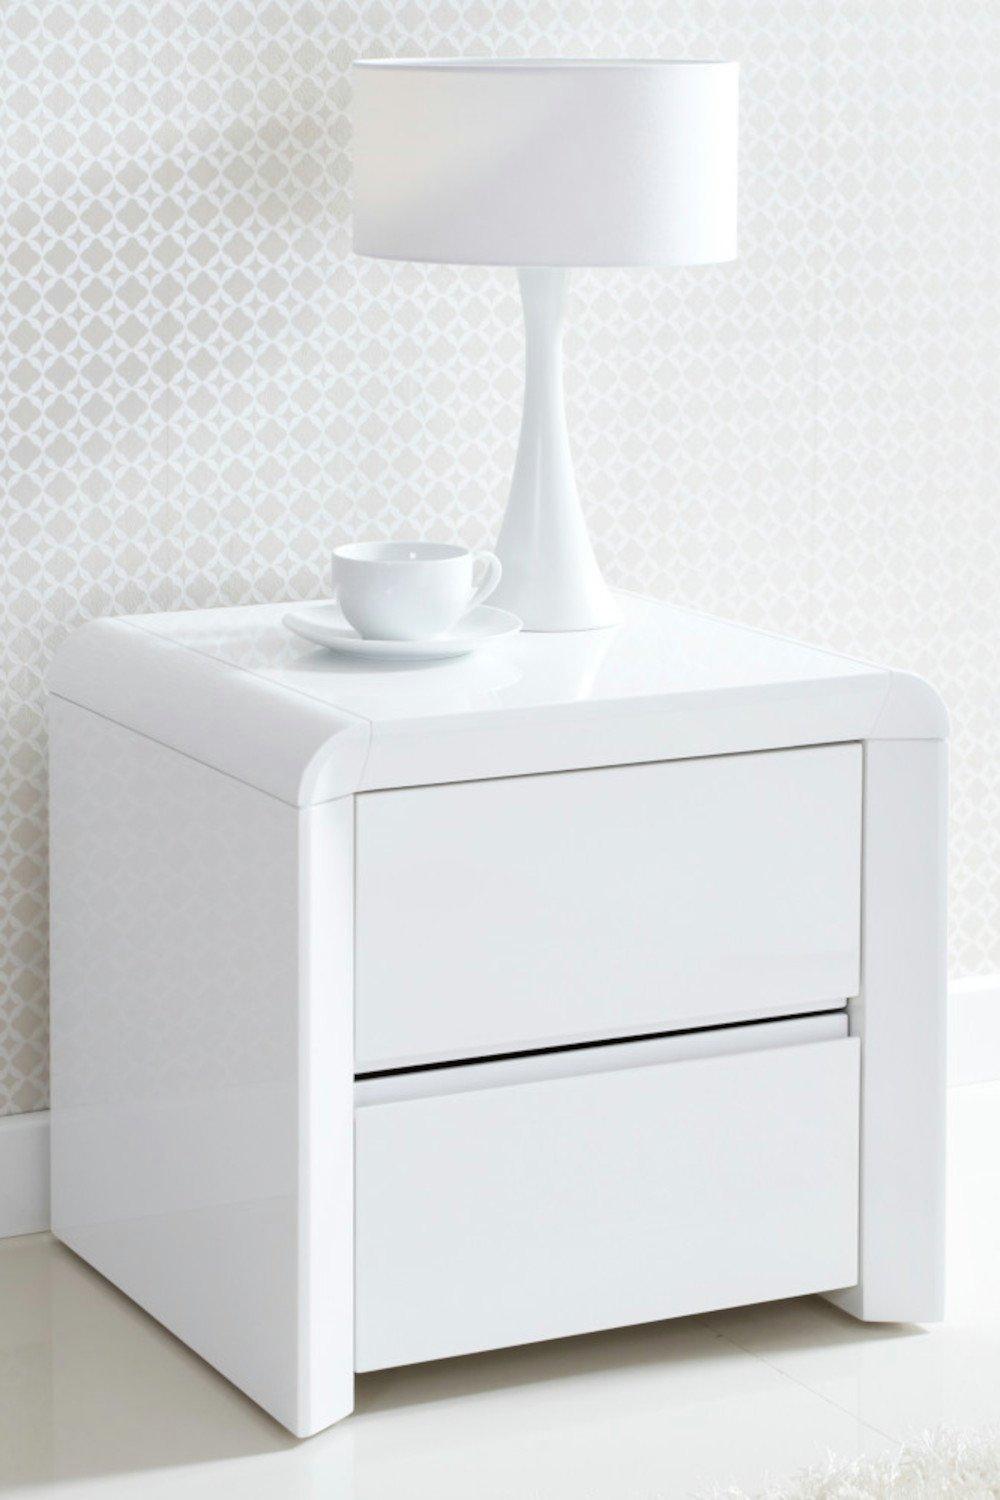 Ice White High Gloss 2 Drawer Bedside